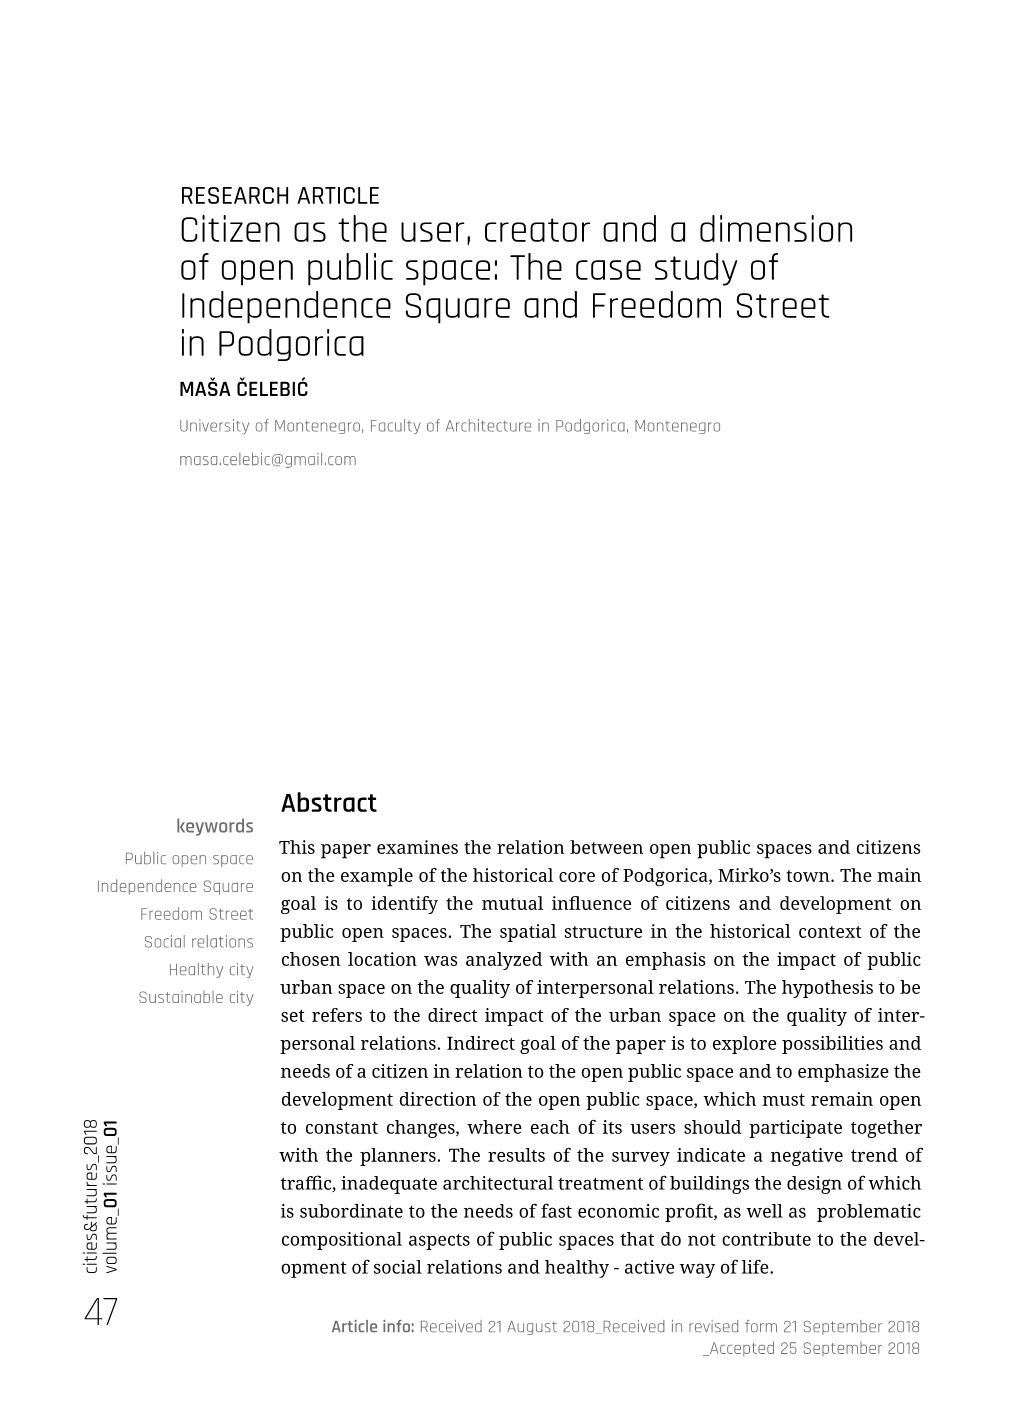 Citizen As the User, Creator and a Dimension Of